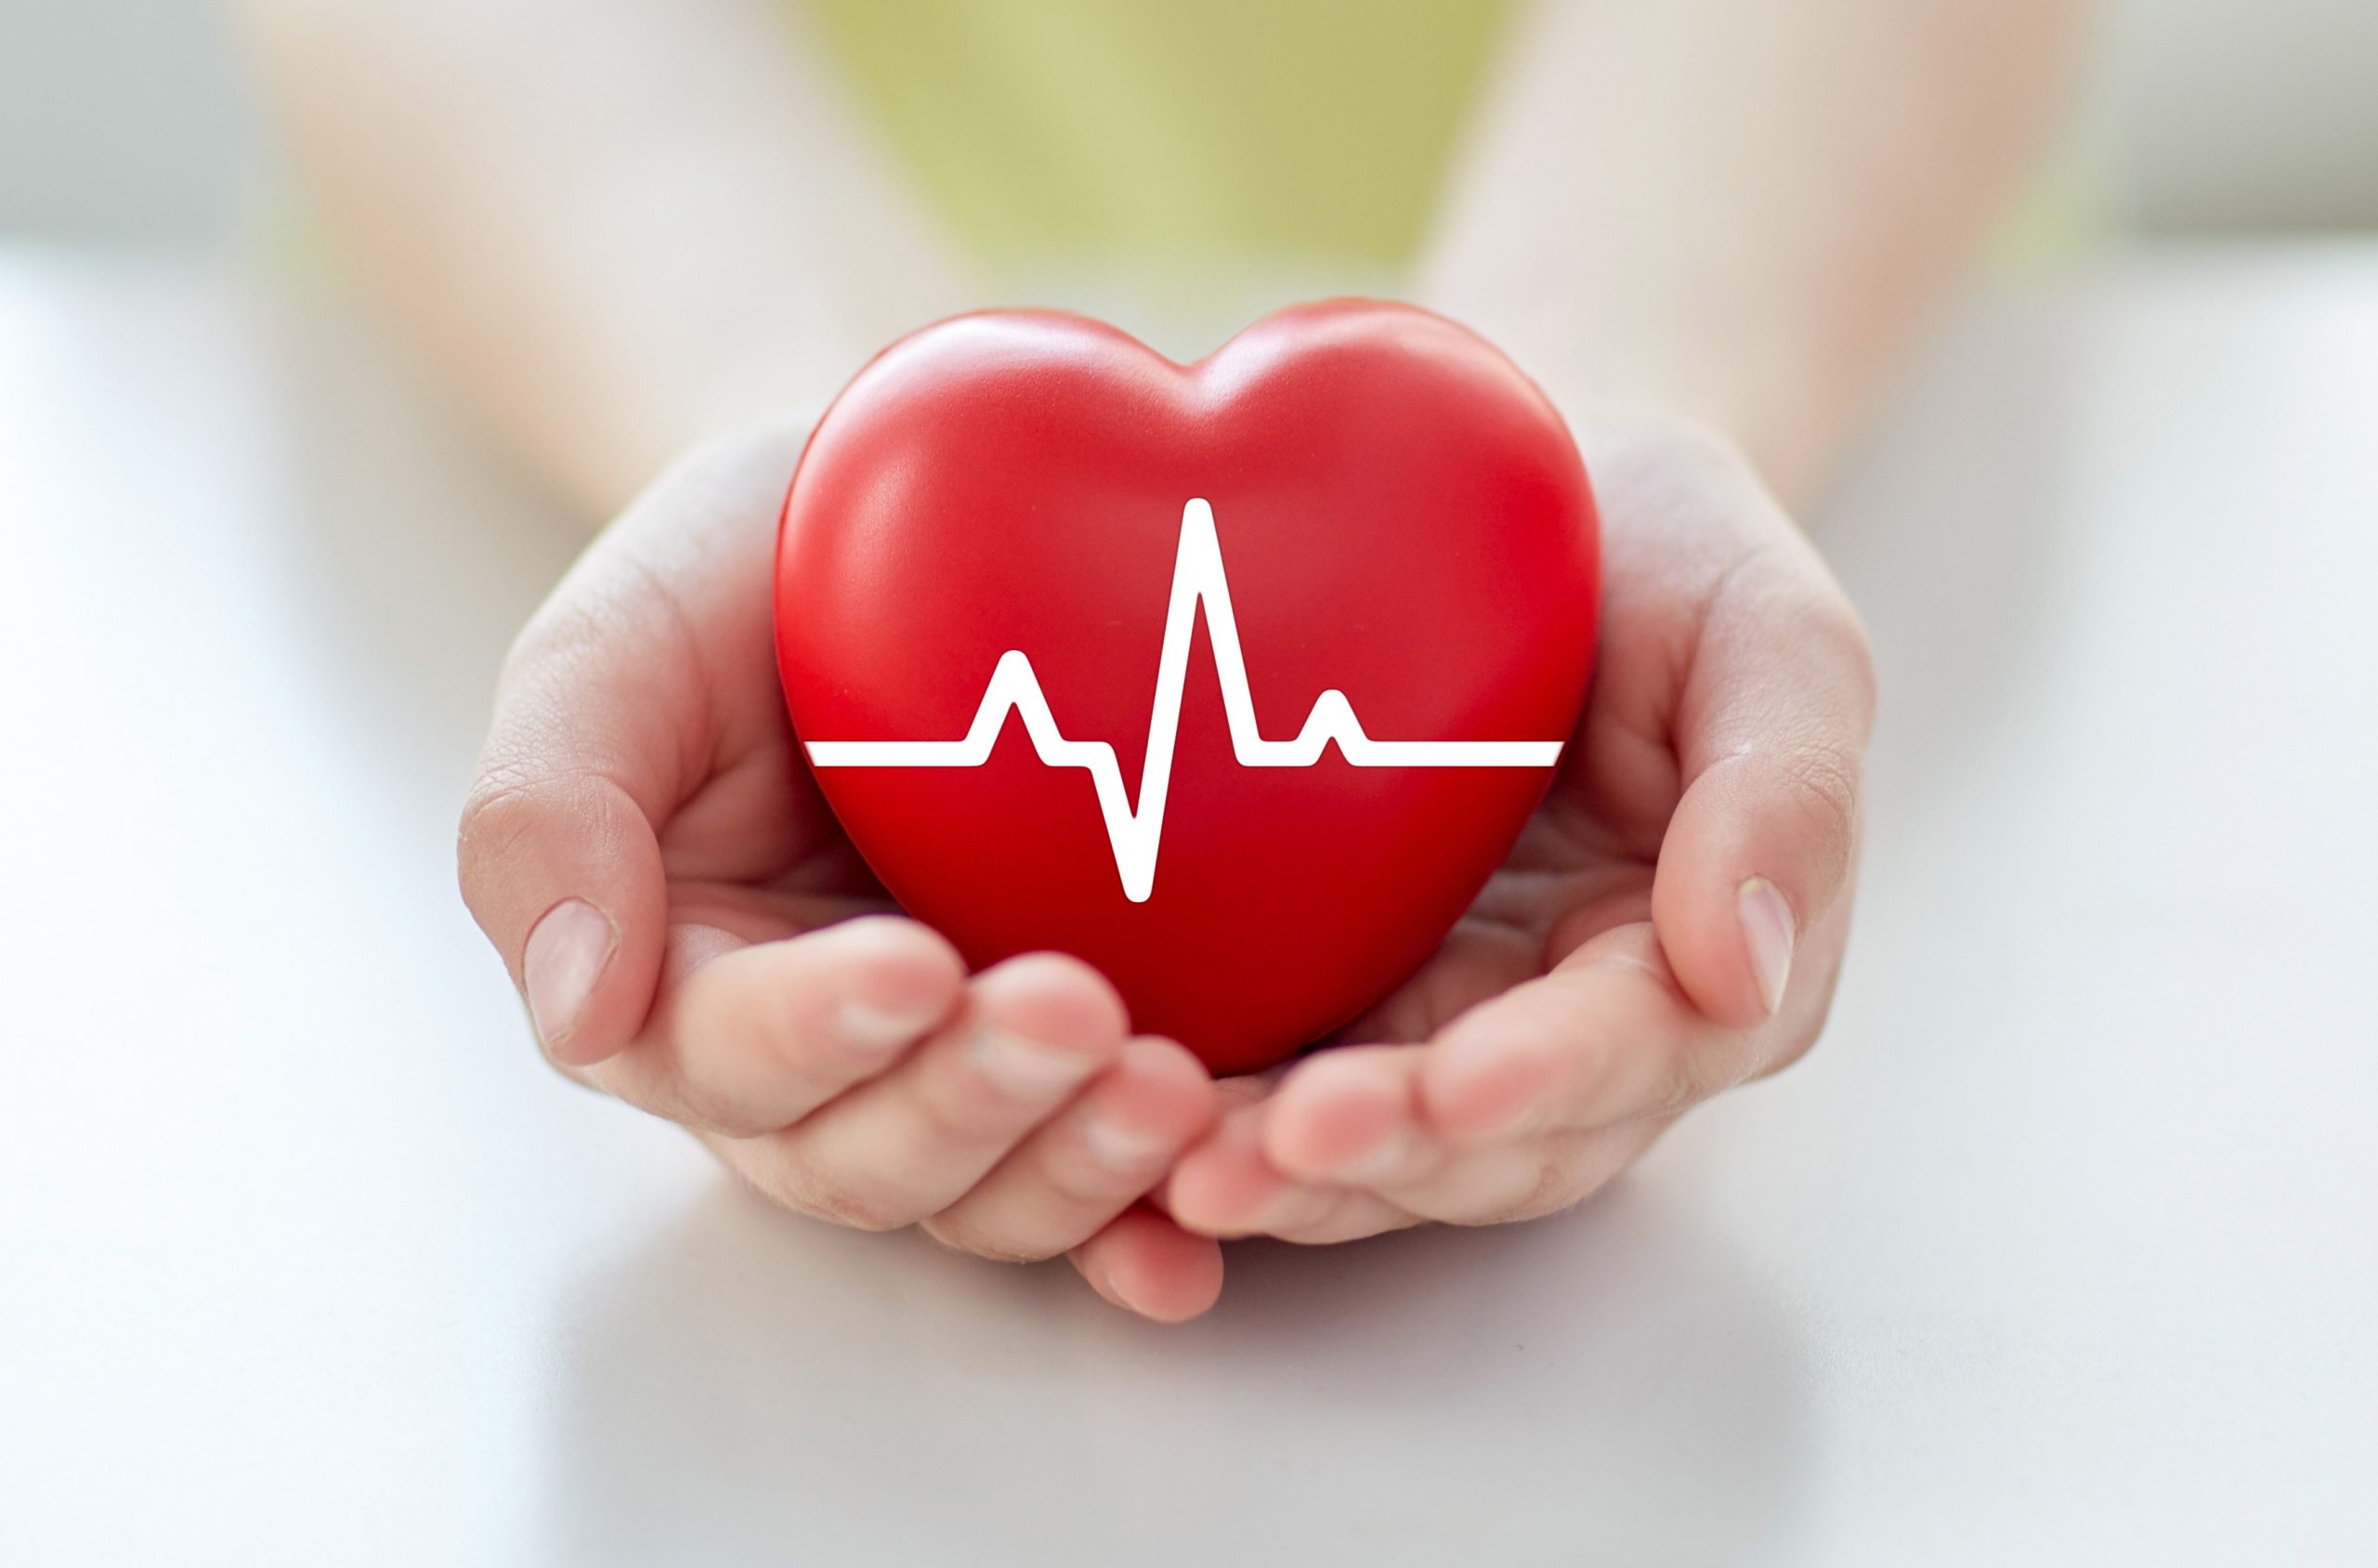 Two hands cupped together holding a small red haert shape with a white cardiogram line trace printed on it.